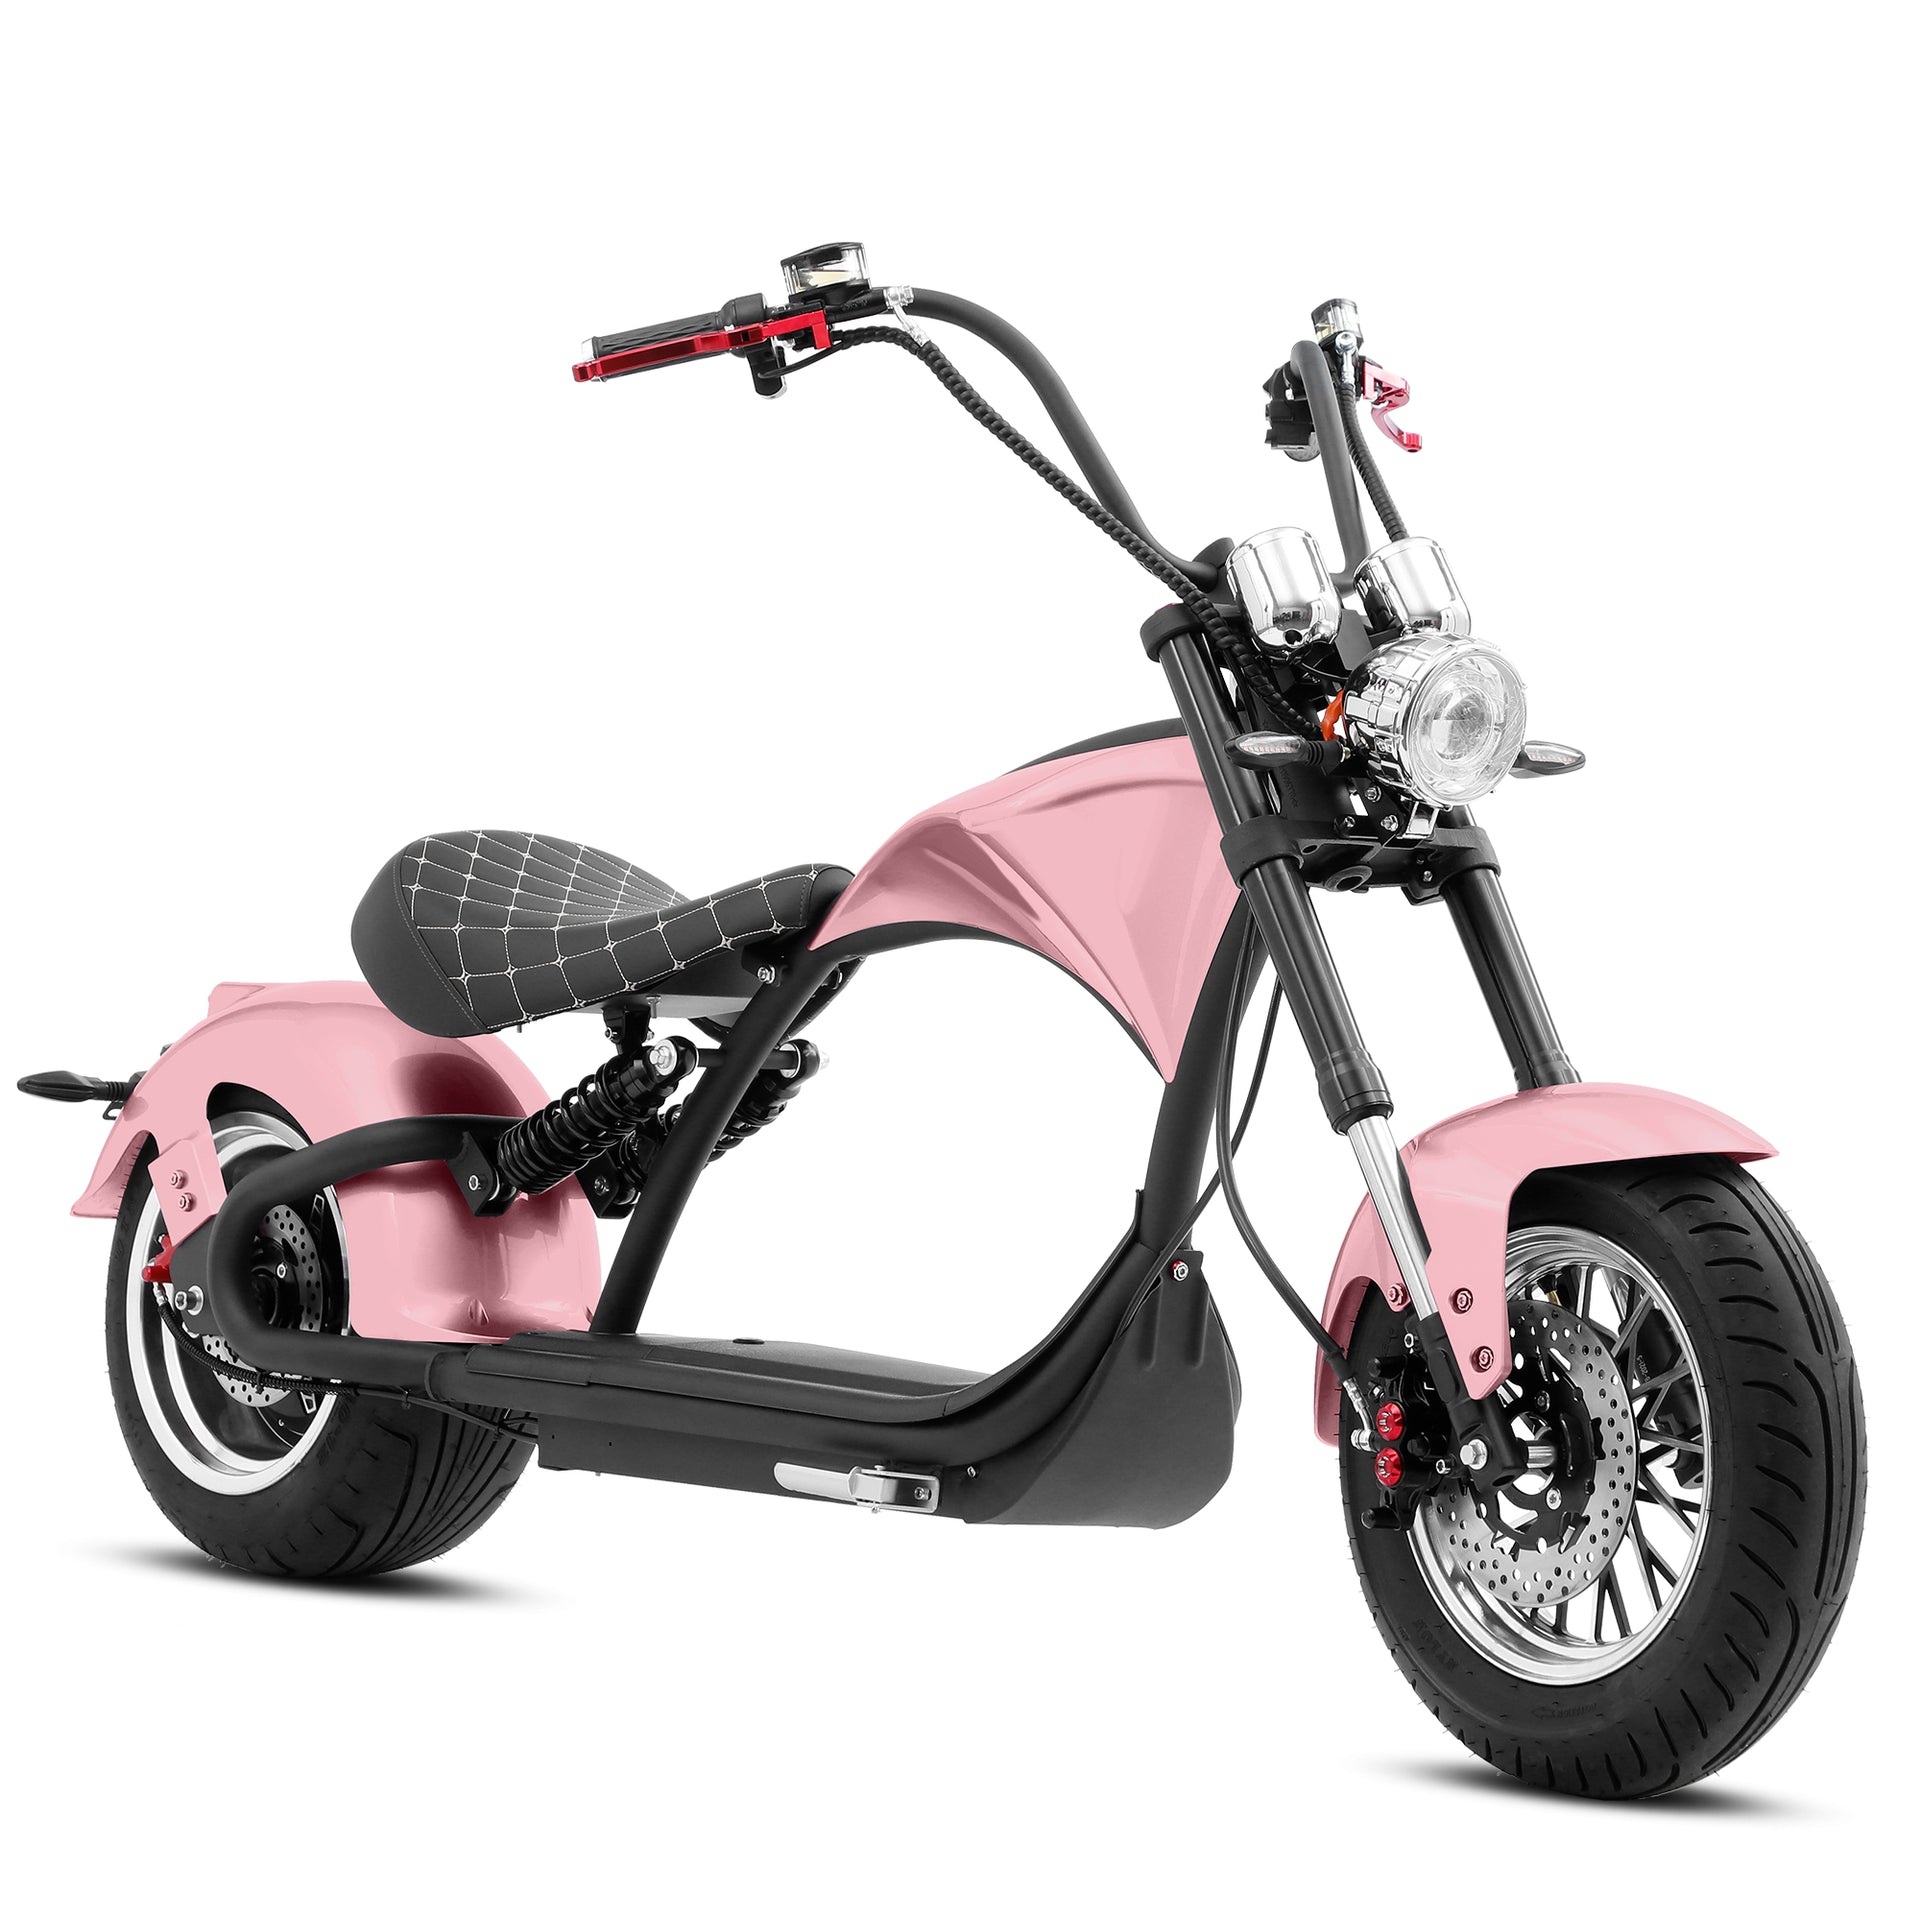 Eahora Emars M1P 2000W Electric Scooter With 60V 30AH 1.8KWH Battery - 37MPH -Pink